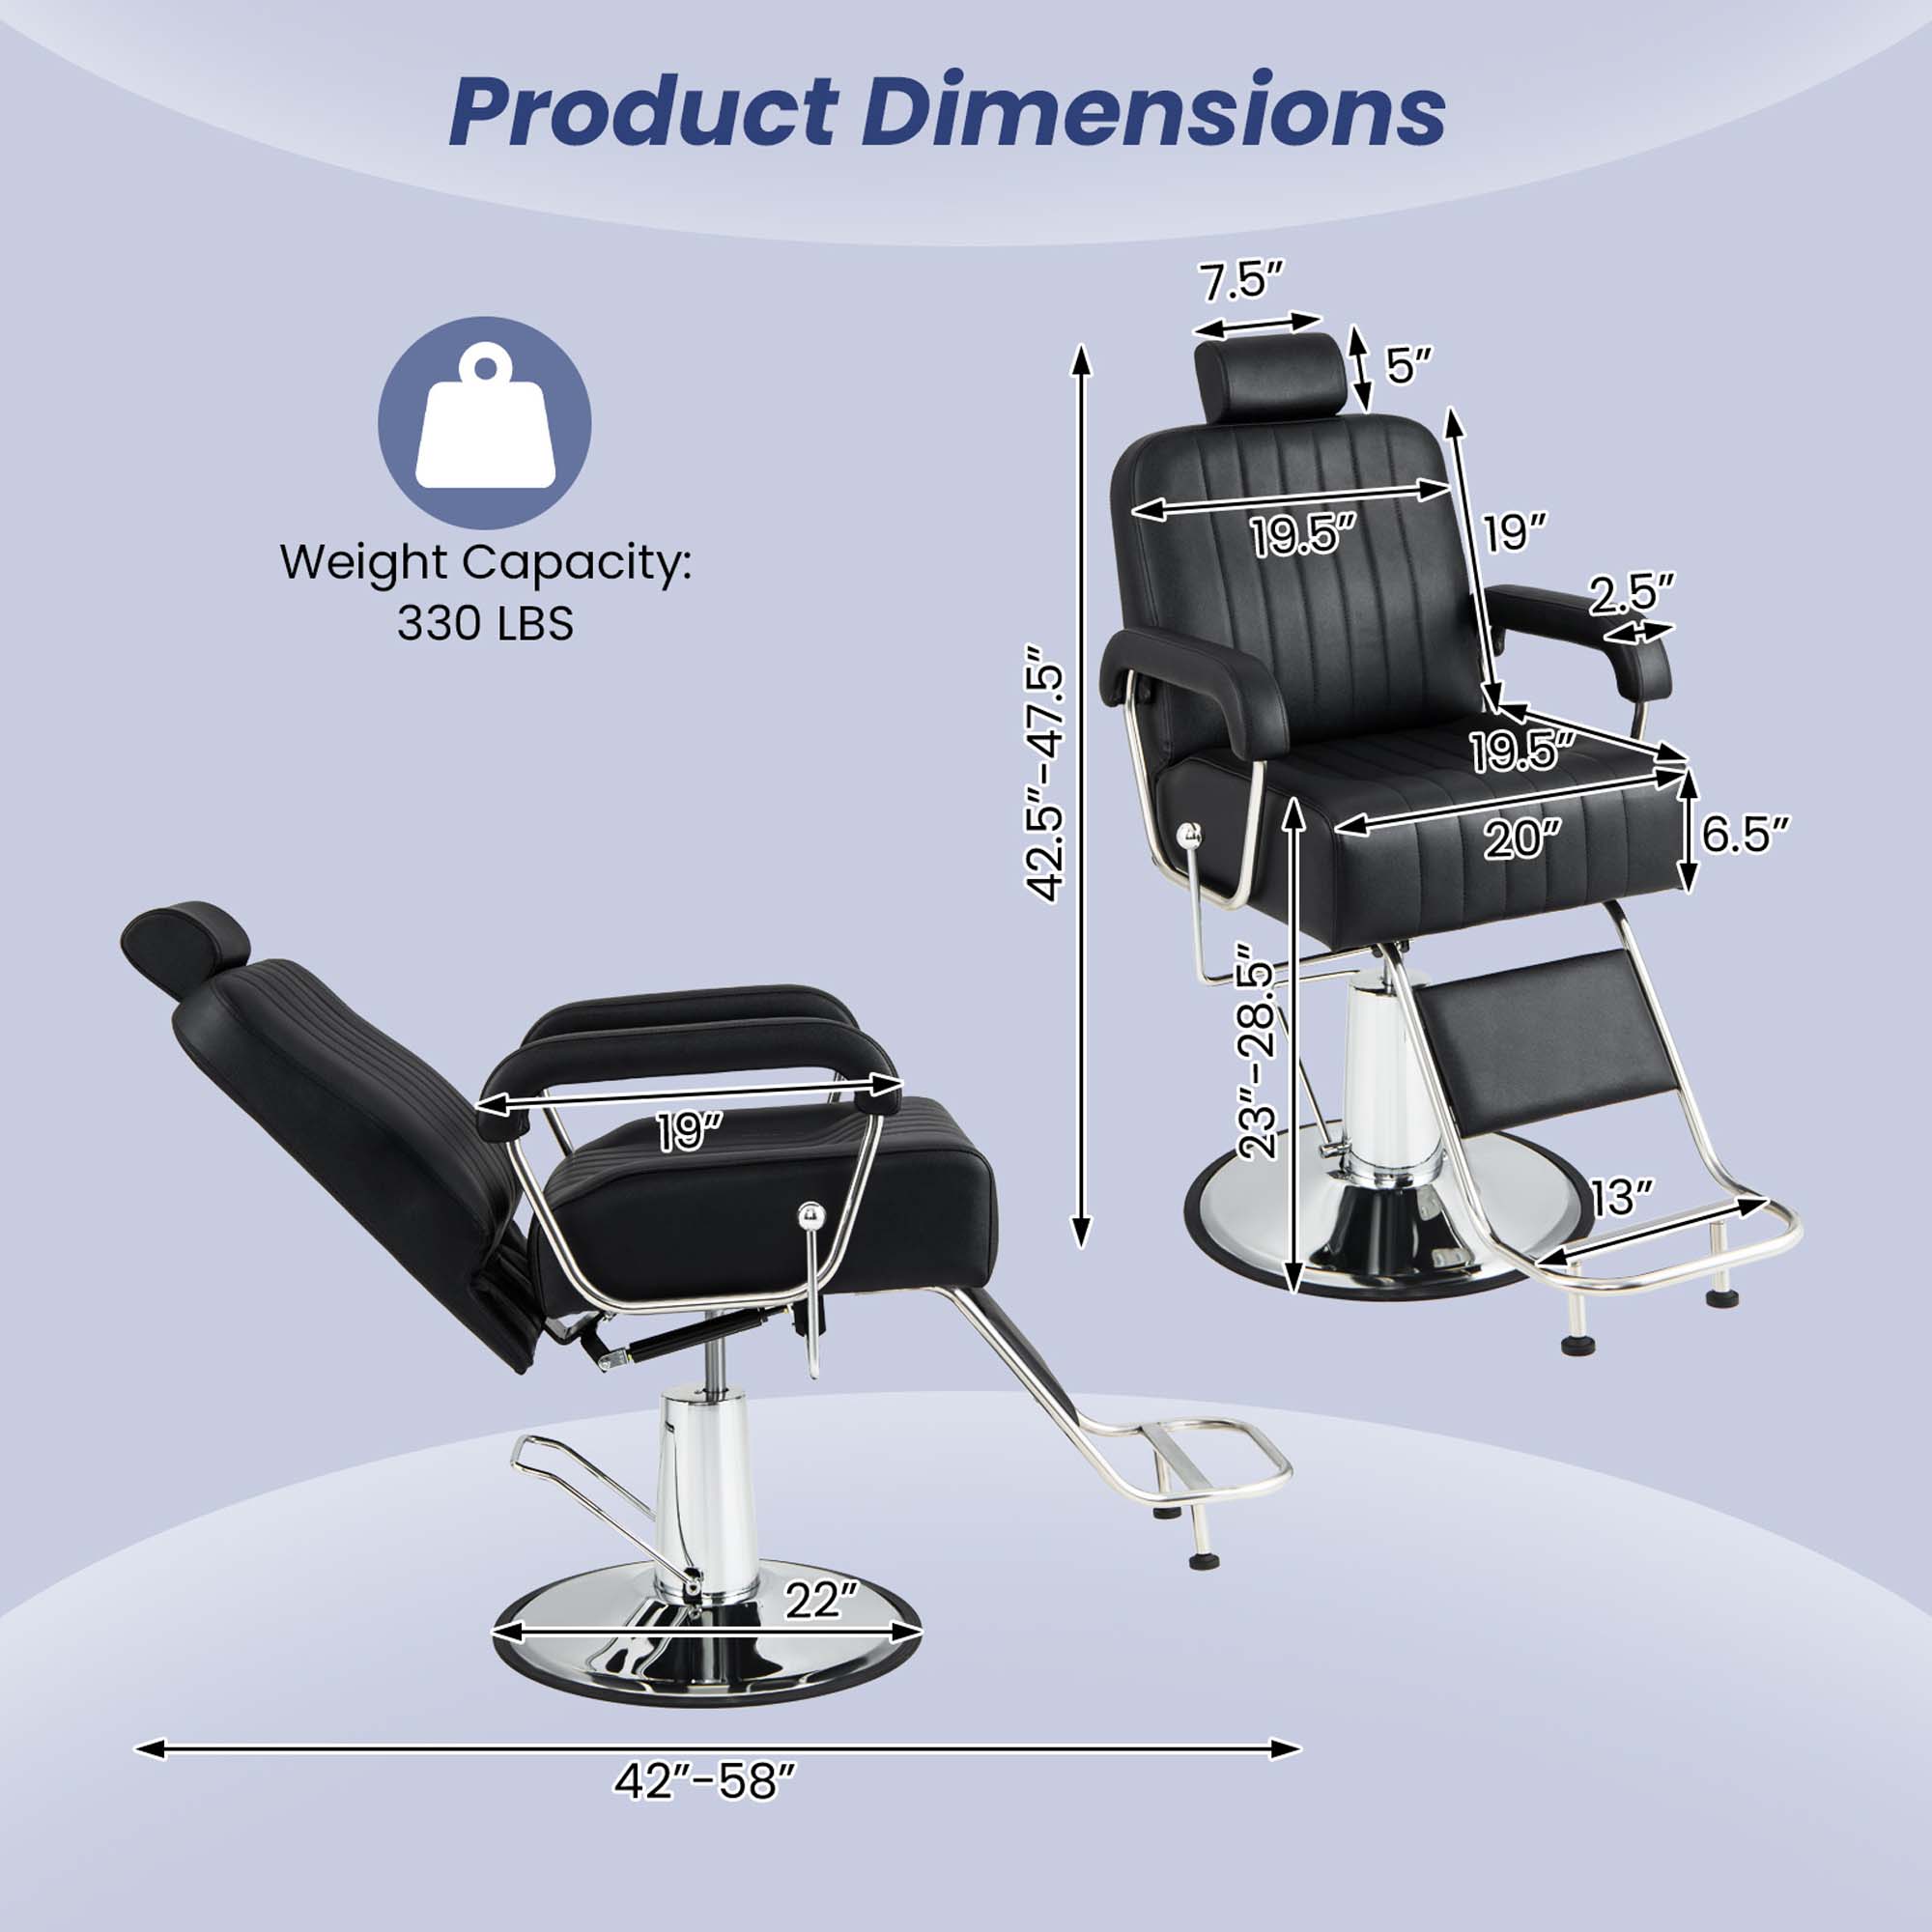 Costway Adjustable Barber Chair Hydraulic Salon Chair with Reclining Backrest & 360°Swivel